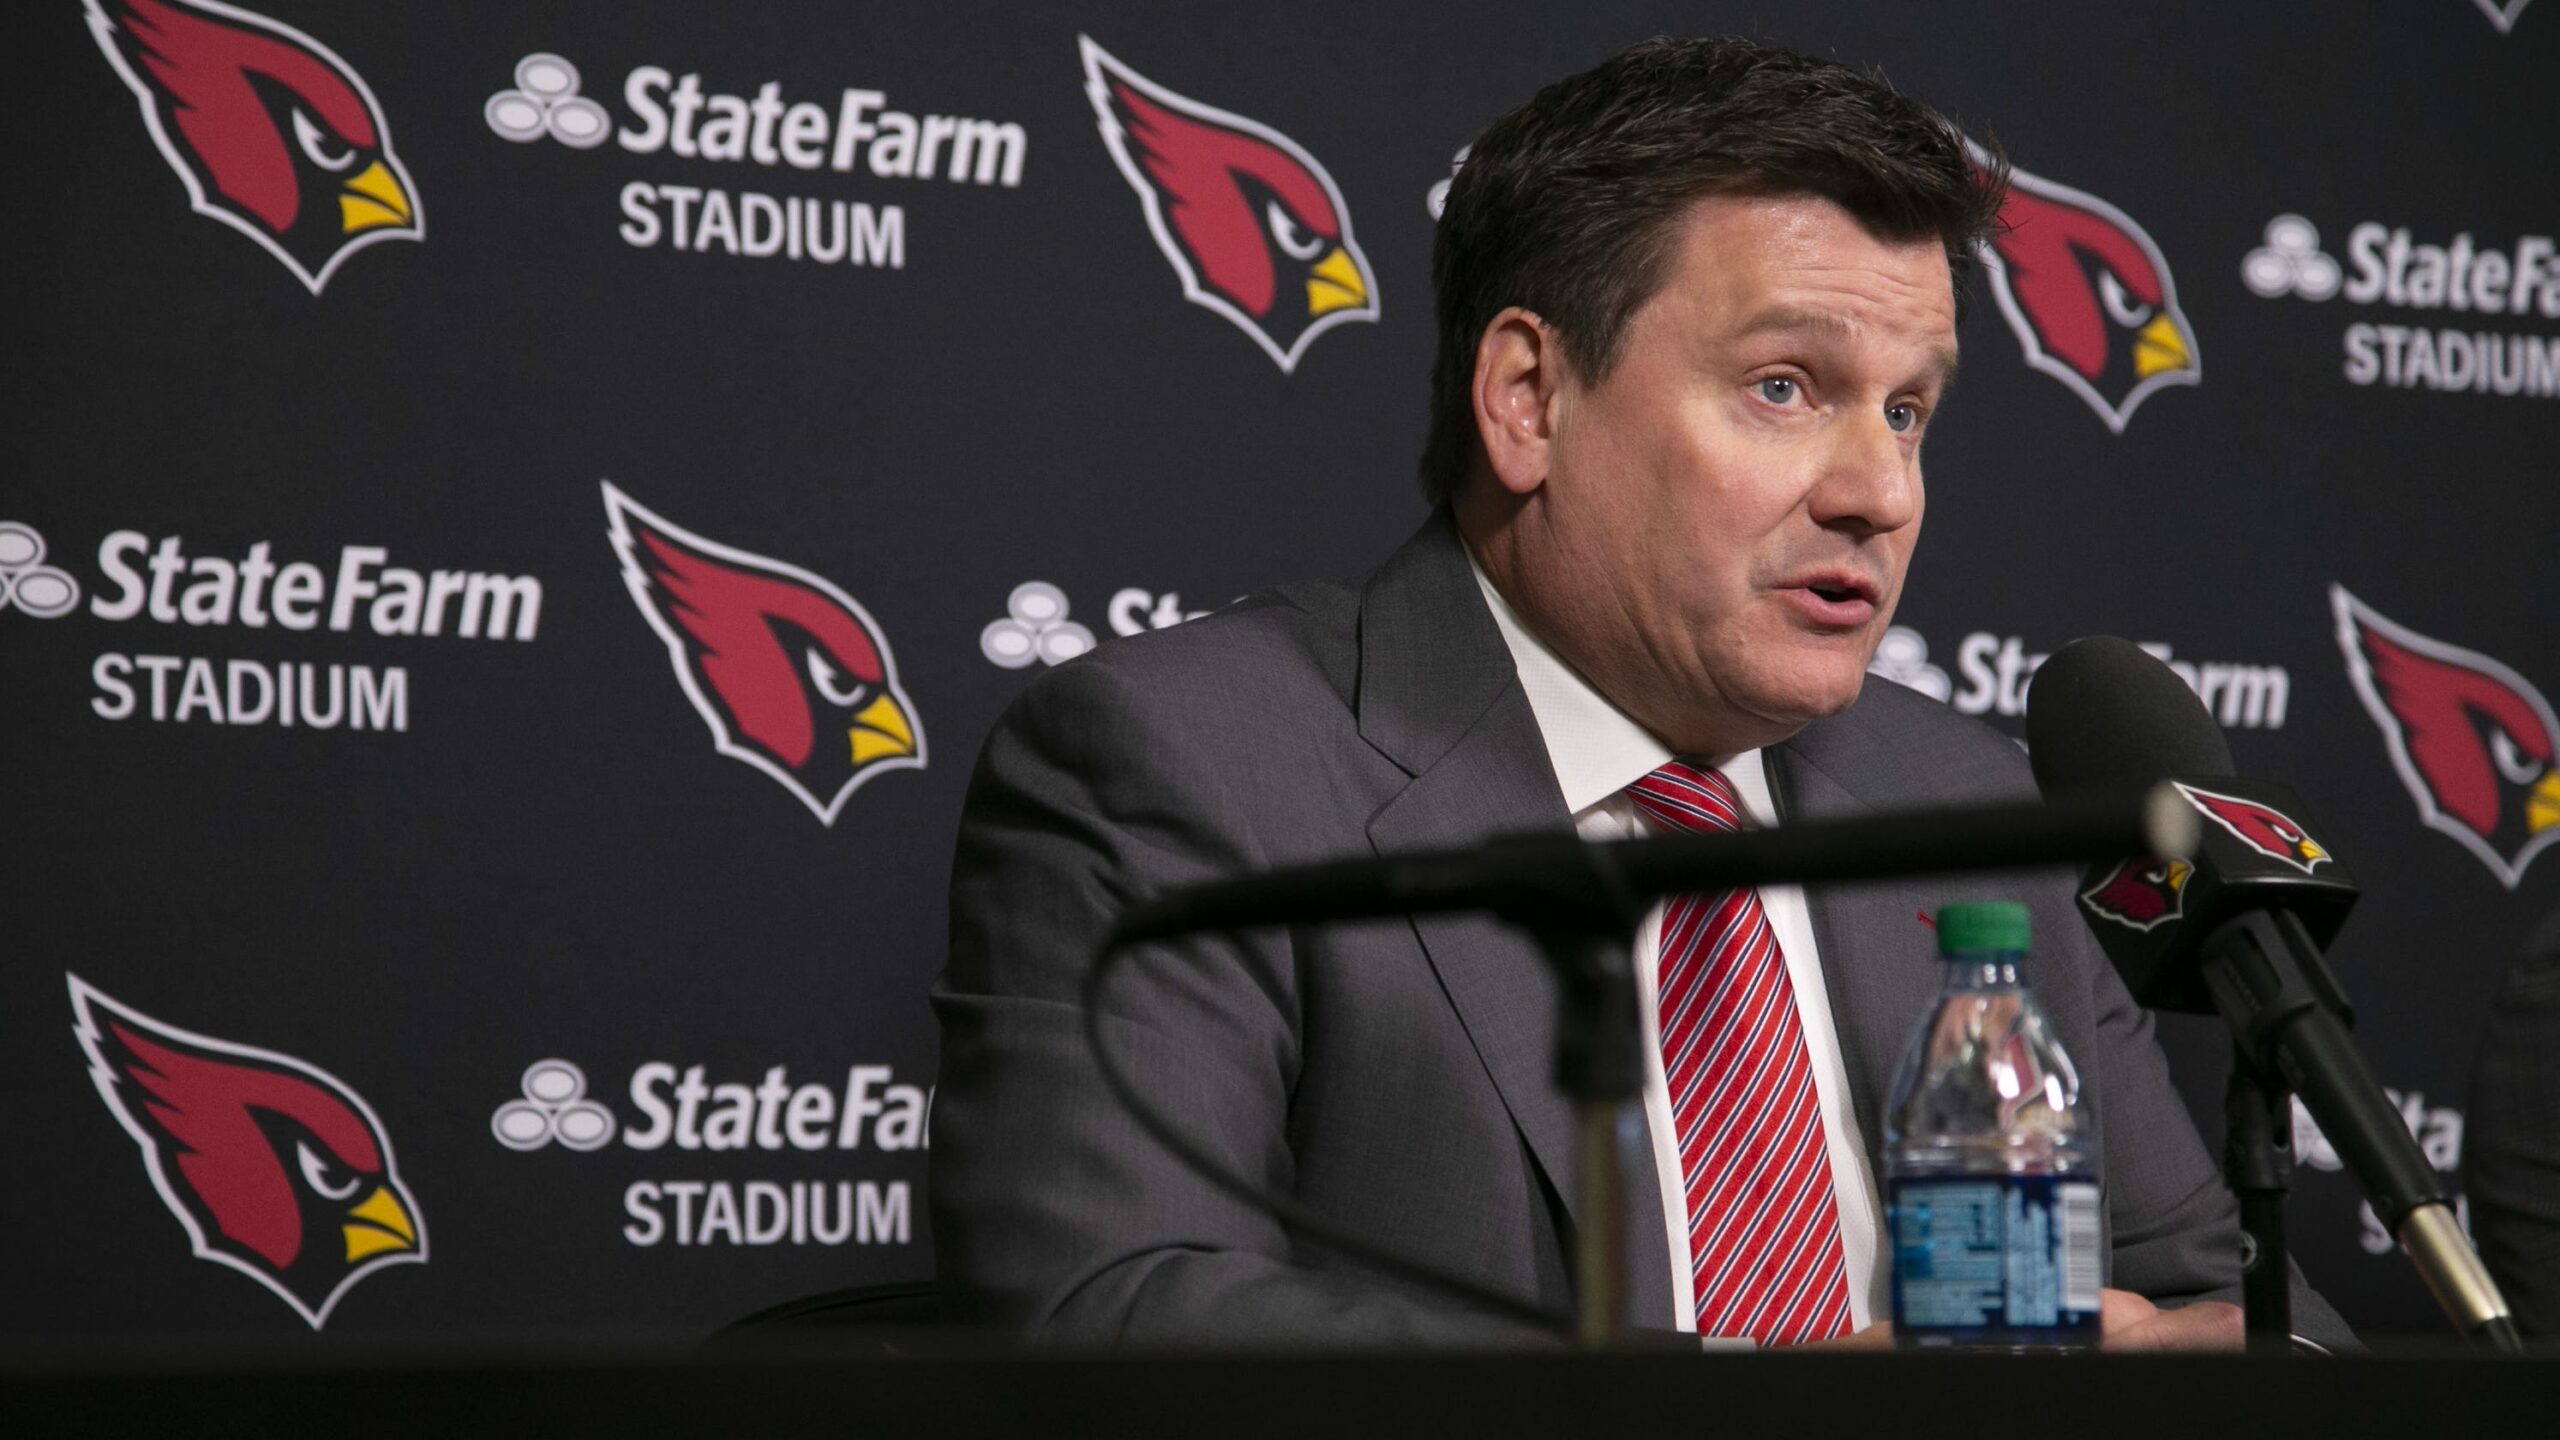 Arizona Cardinals owner released from hospital